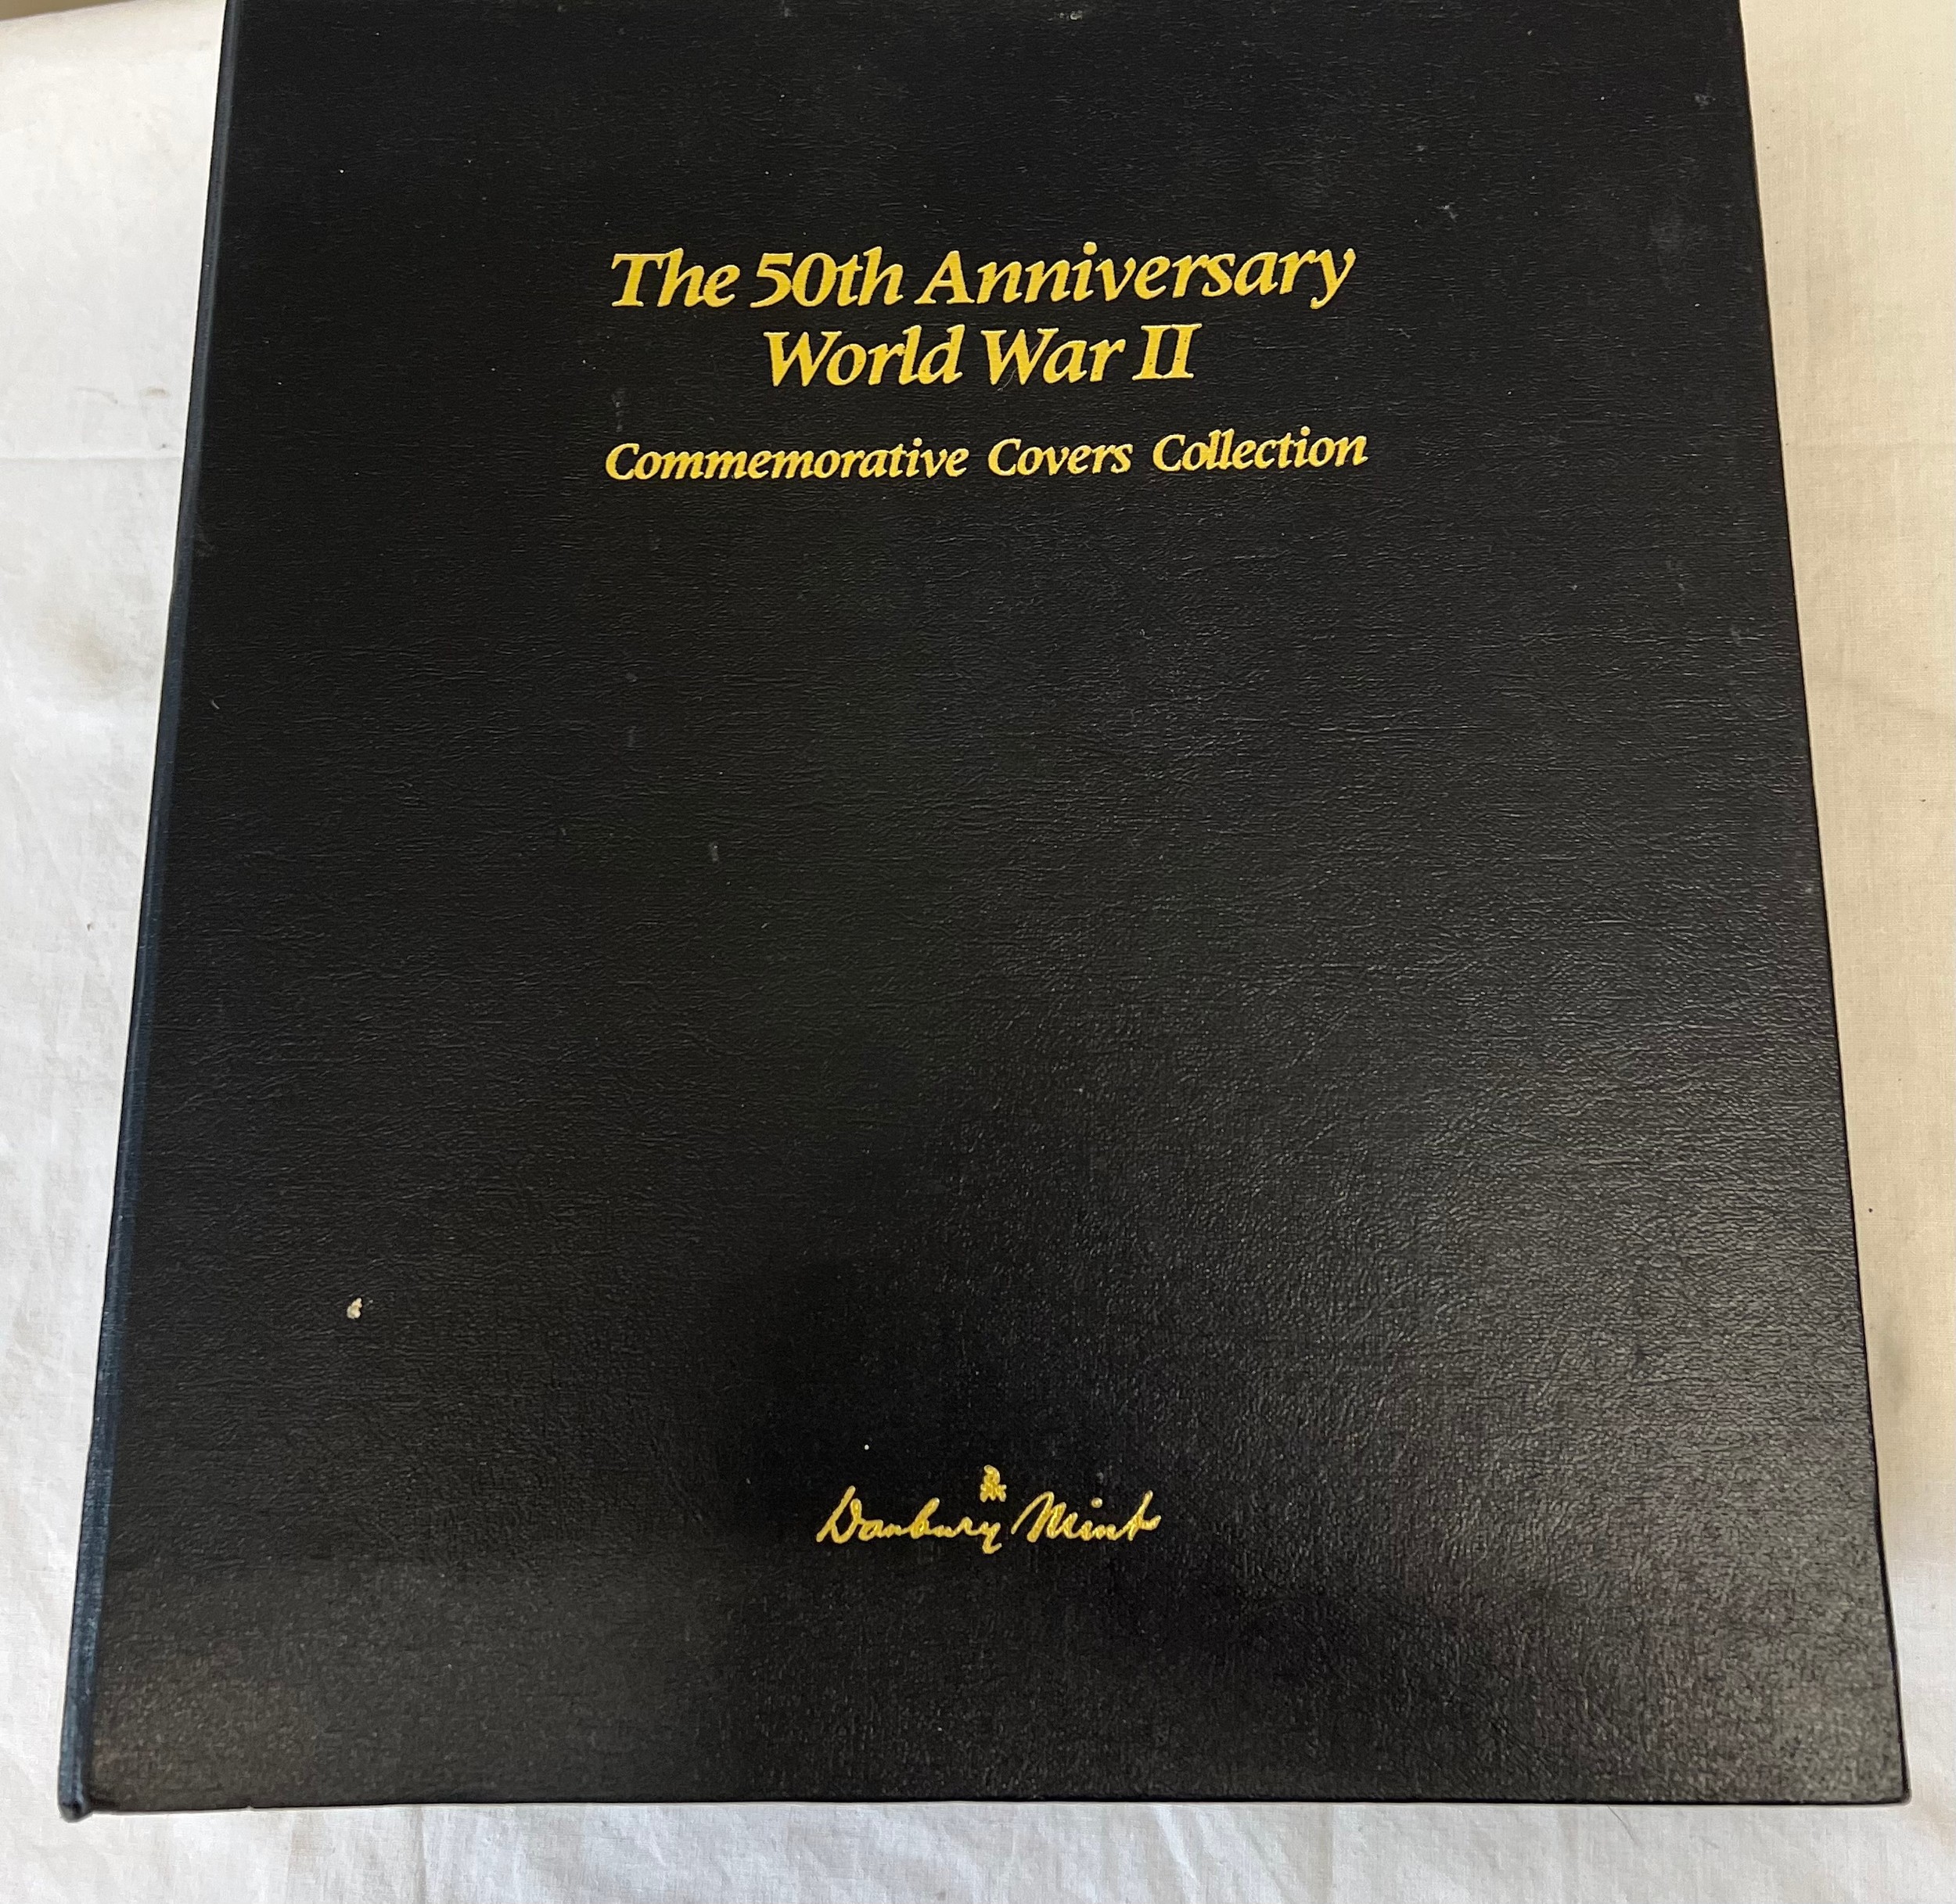 The Danbury Mint- First Day Covers - The 50th Anniversary of World War II Commemorative covers in